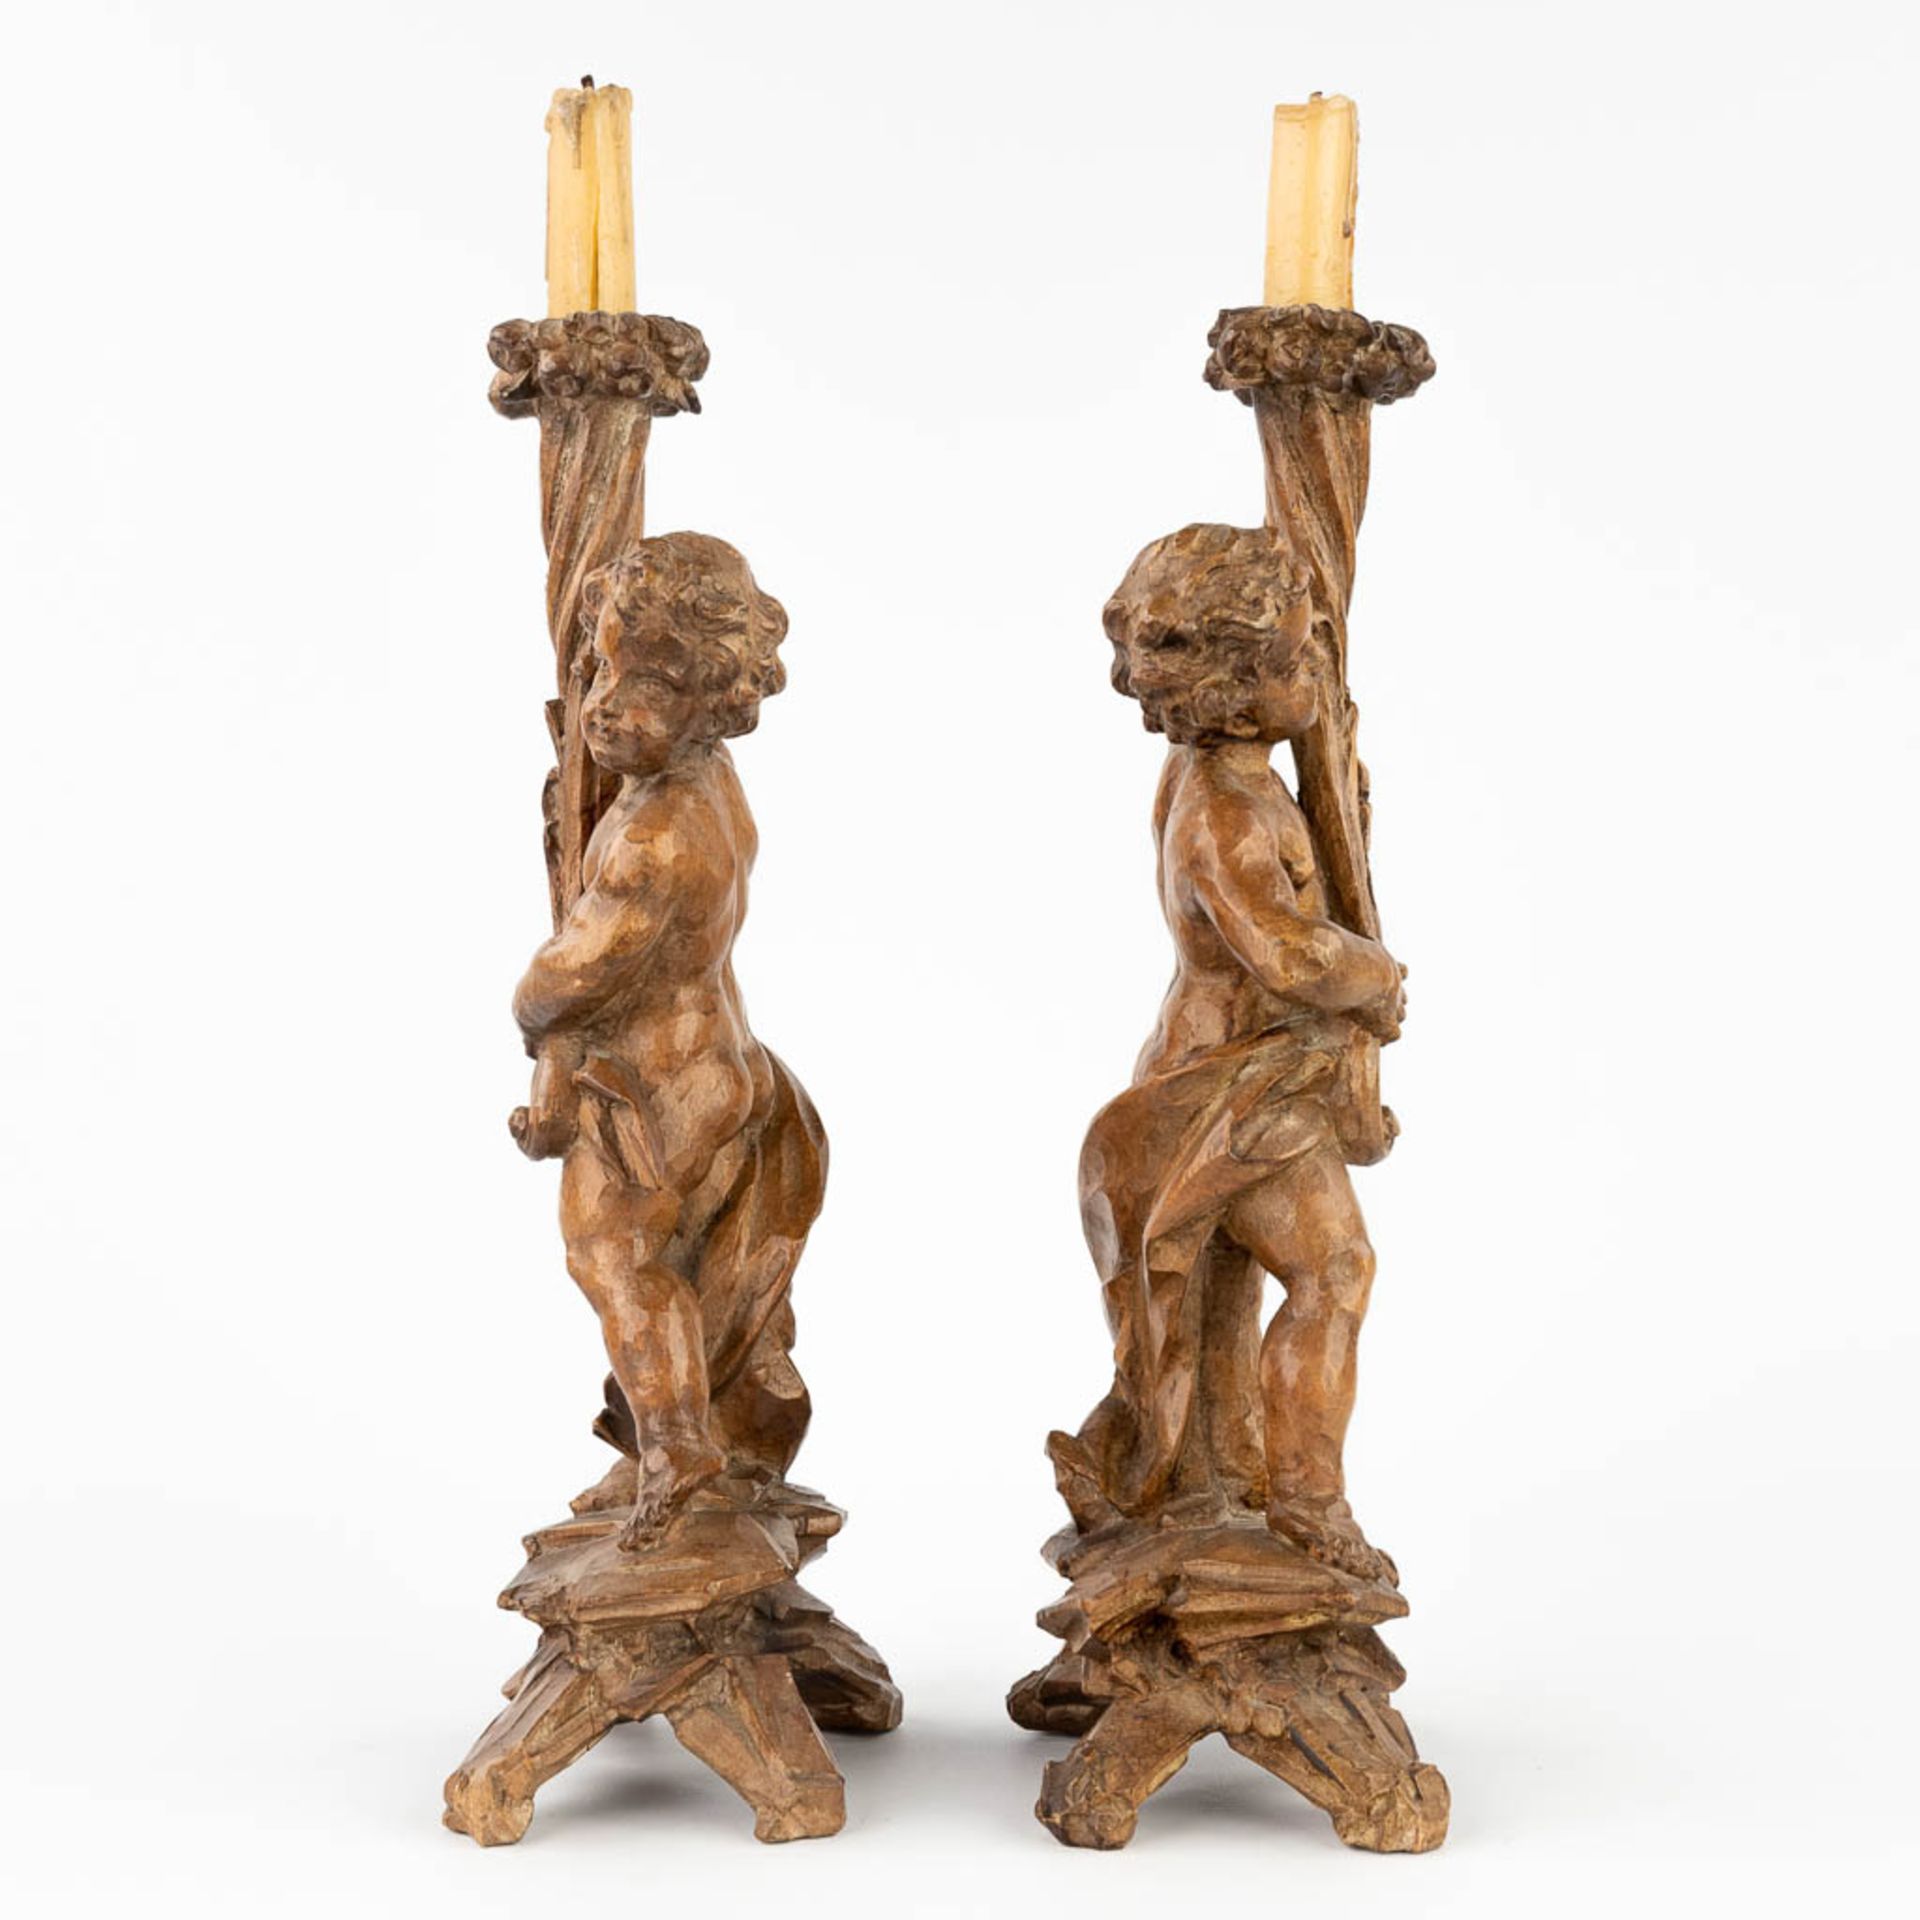 A pair of wood-sculptured candle holders, with putti. 19th C. (L:9 x W:12 x H:34 cm) - Image 5 of 12